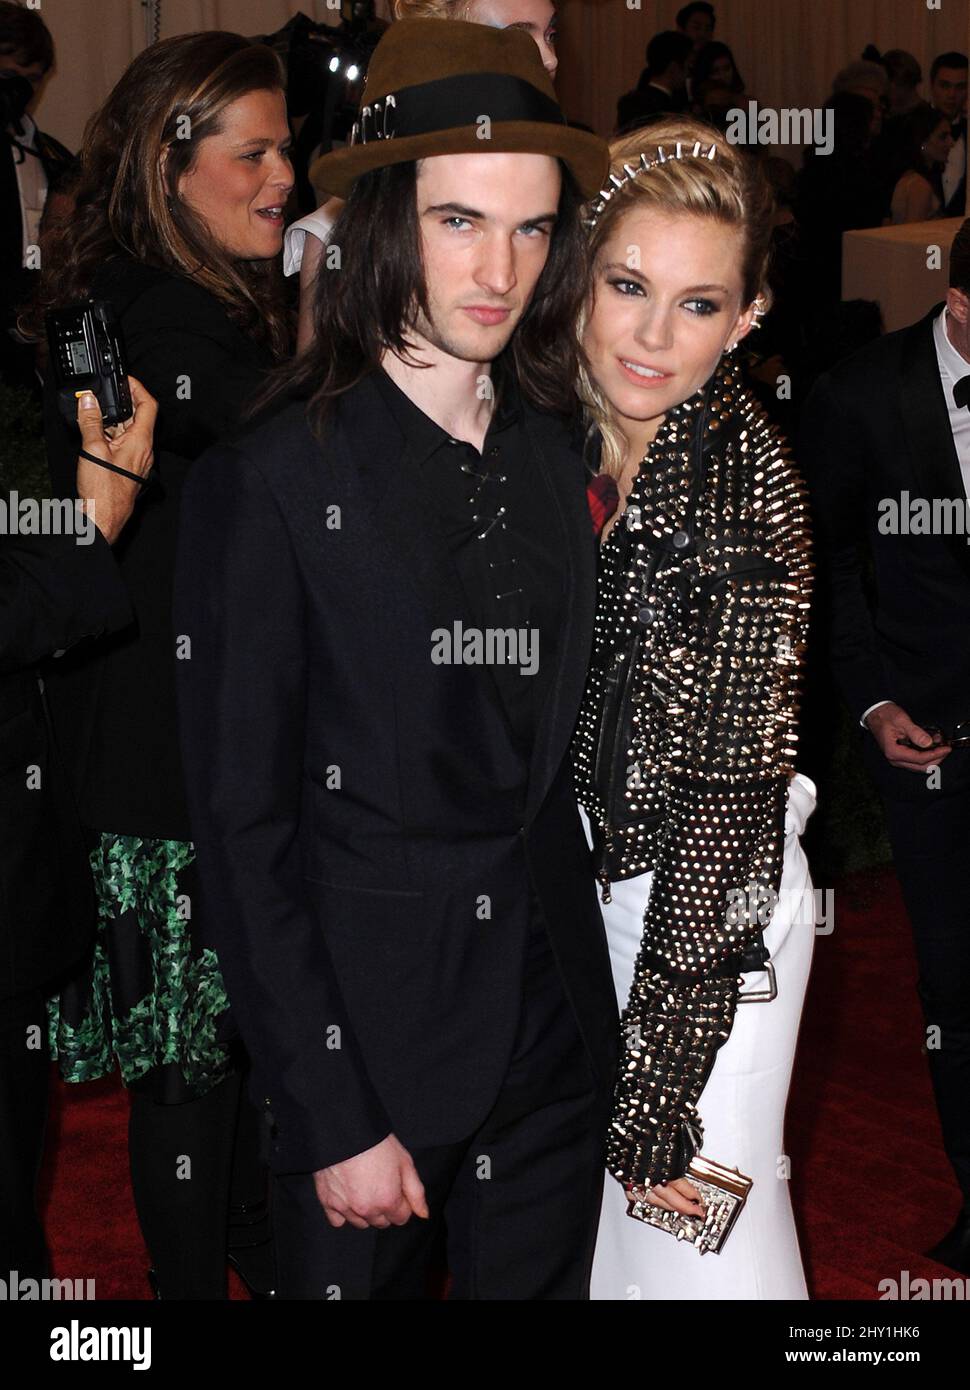 Sienna Miller, Tom Sturridge attending the the 'Punk' Chaos to Couture